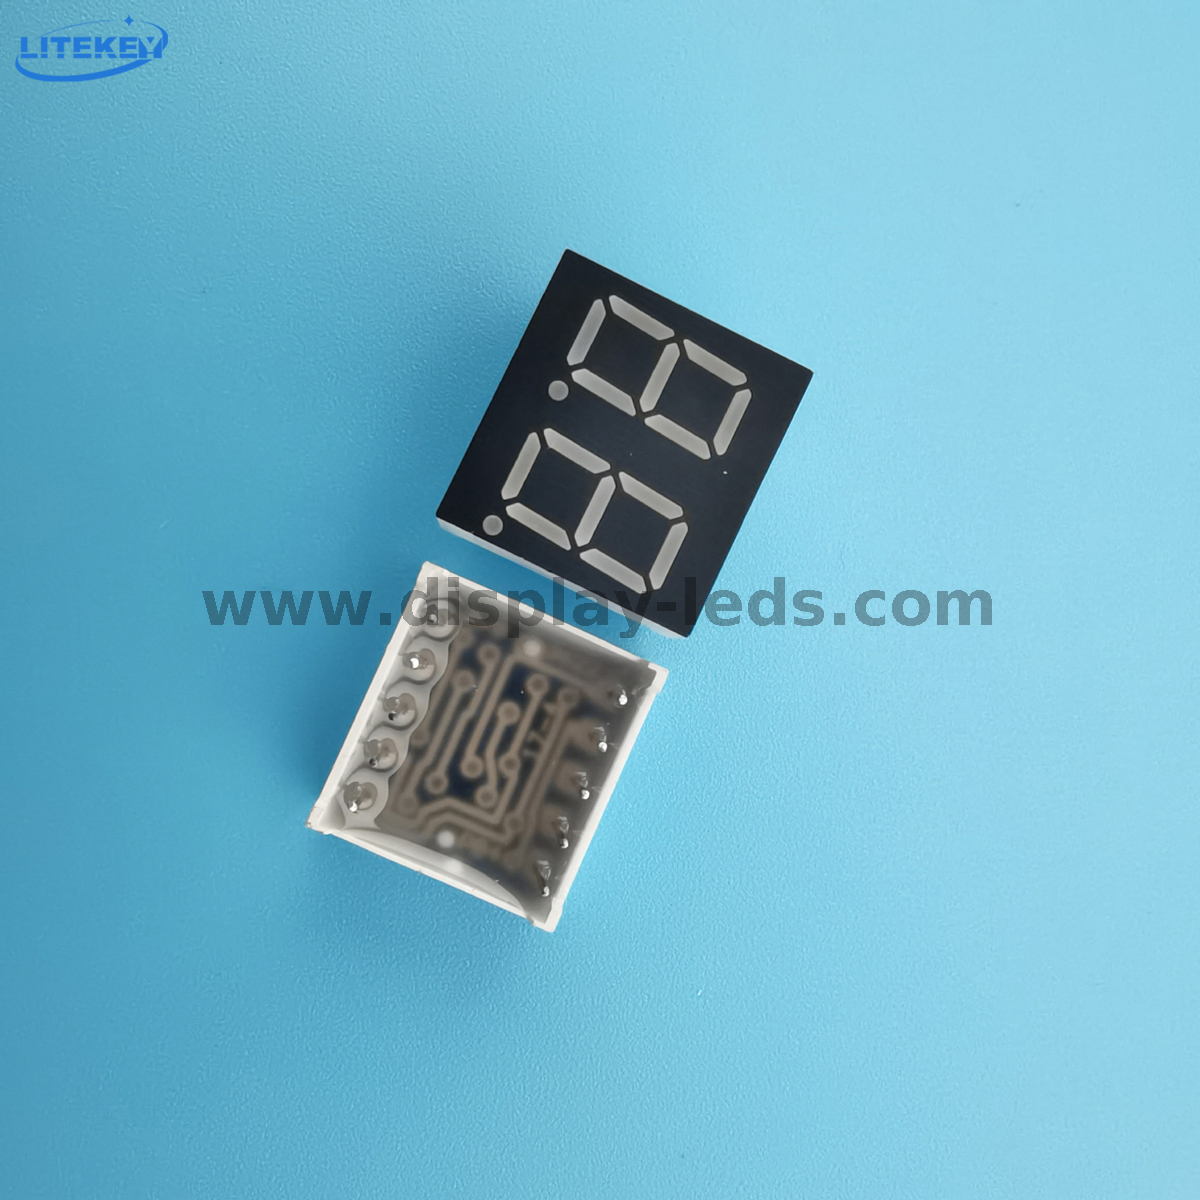 LD3622A/B Series - 0.36 inch 2 digit 7 segment display with 15mm length